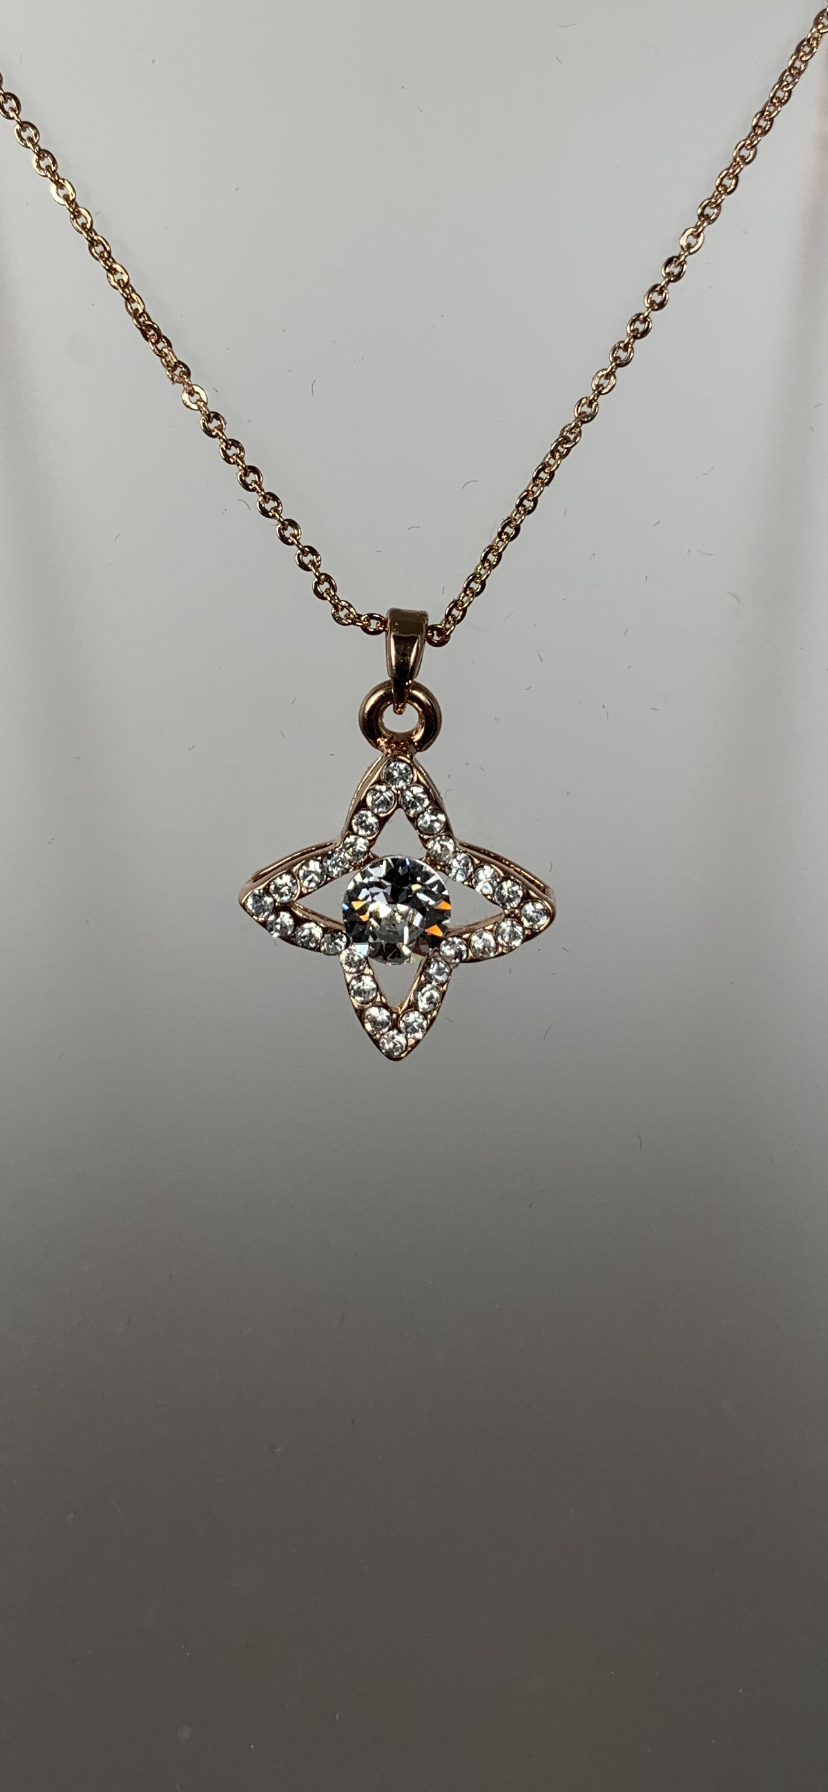 Rose Gold Tone Four Pointed Crystal Pendant Necklace